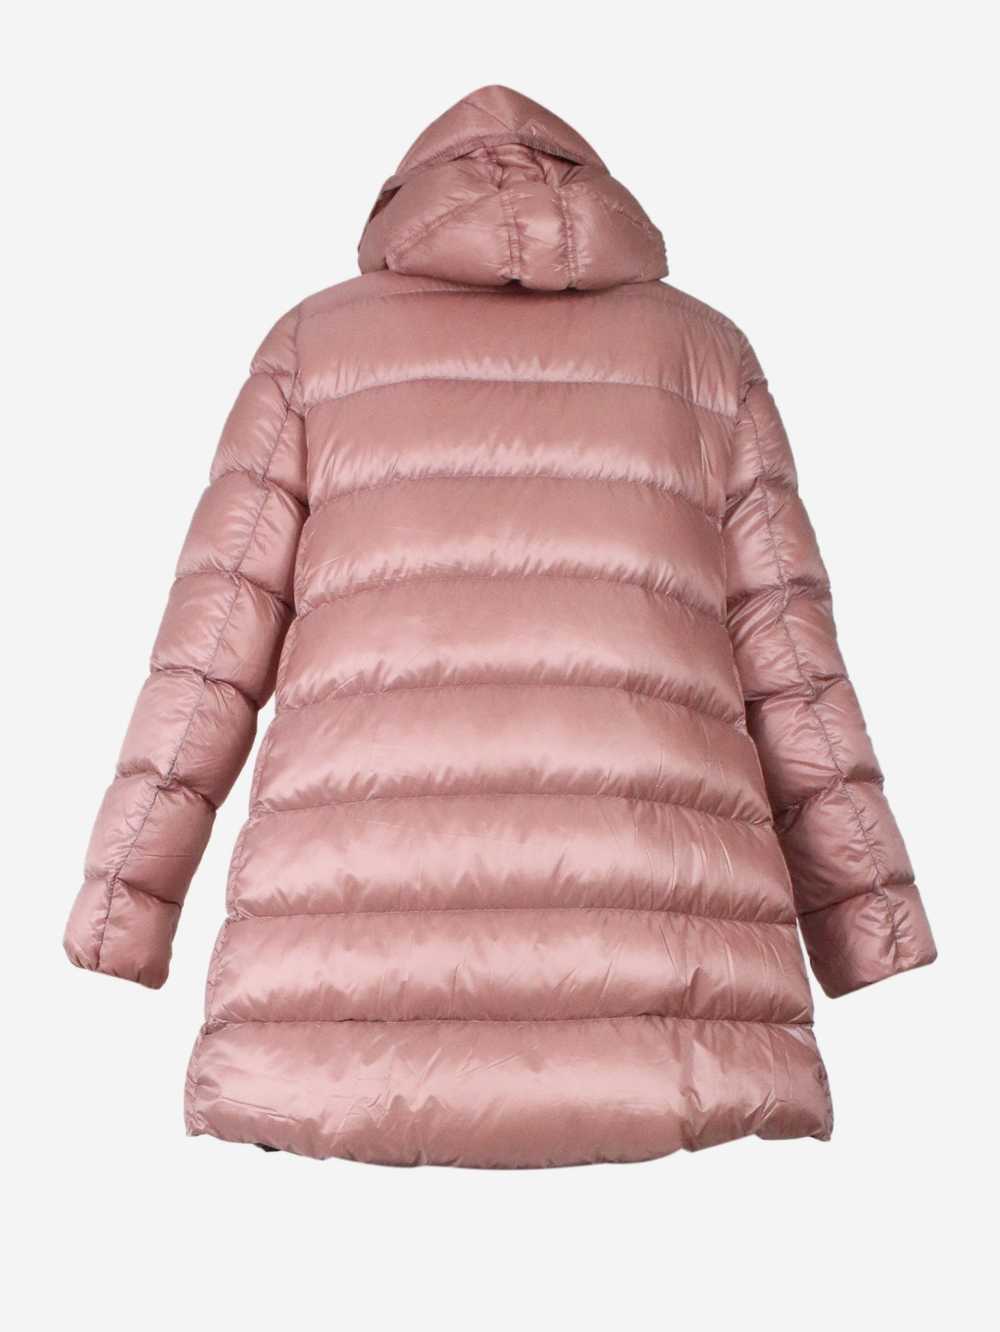 Moncler Pink puffer coat - size 2 - image 4